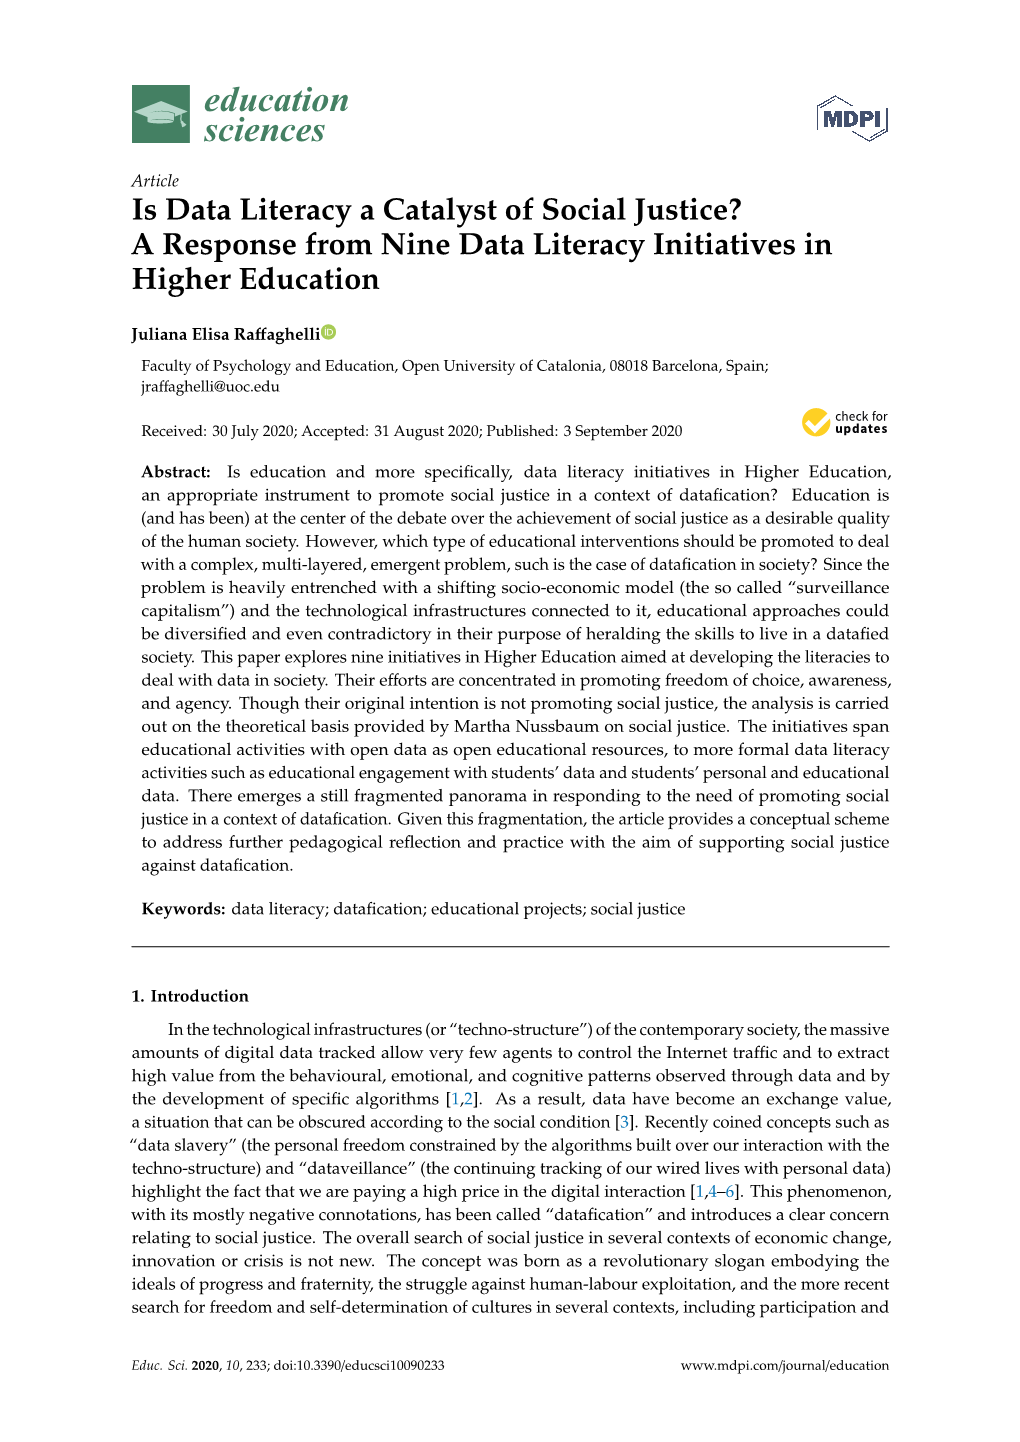 Is Data Literacy a Catalyst of Social Justice? a Response from Nine Data Literacy Initiatives in Higher Education